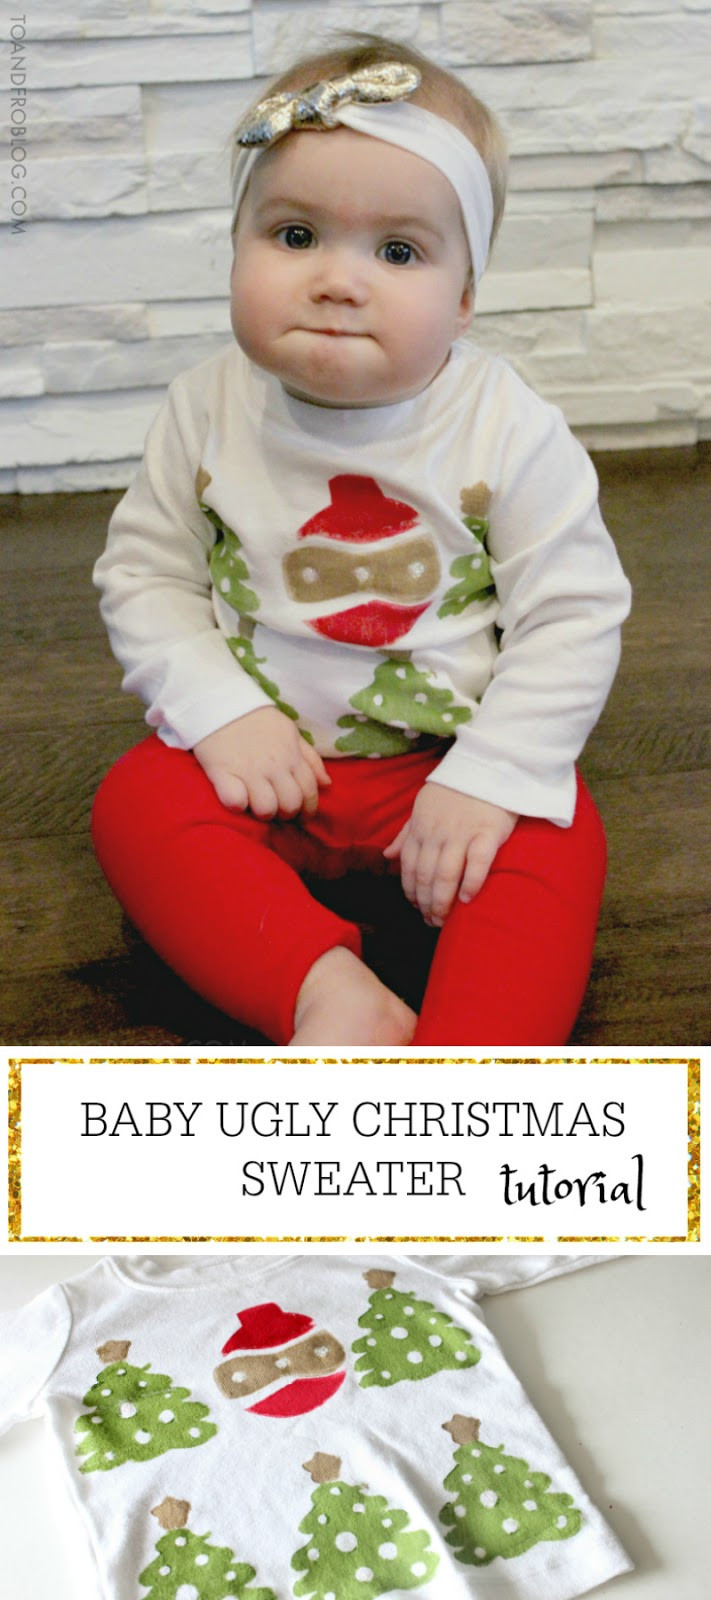 Toddler Ugly Christmas Sweater DIY
 An Ugly Christmas Sweater for Baby DIY